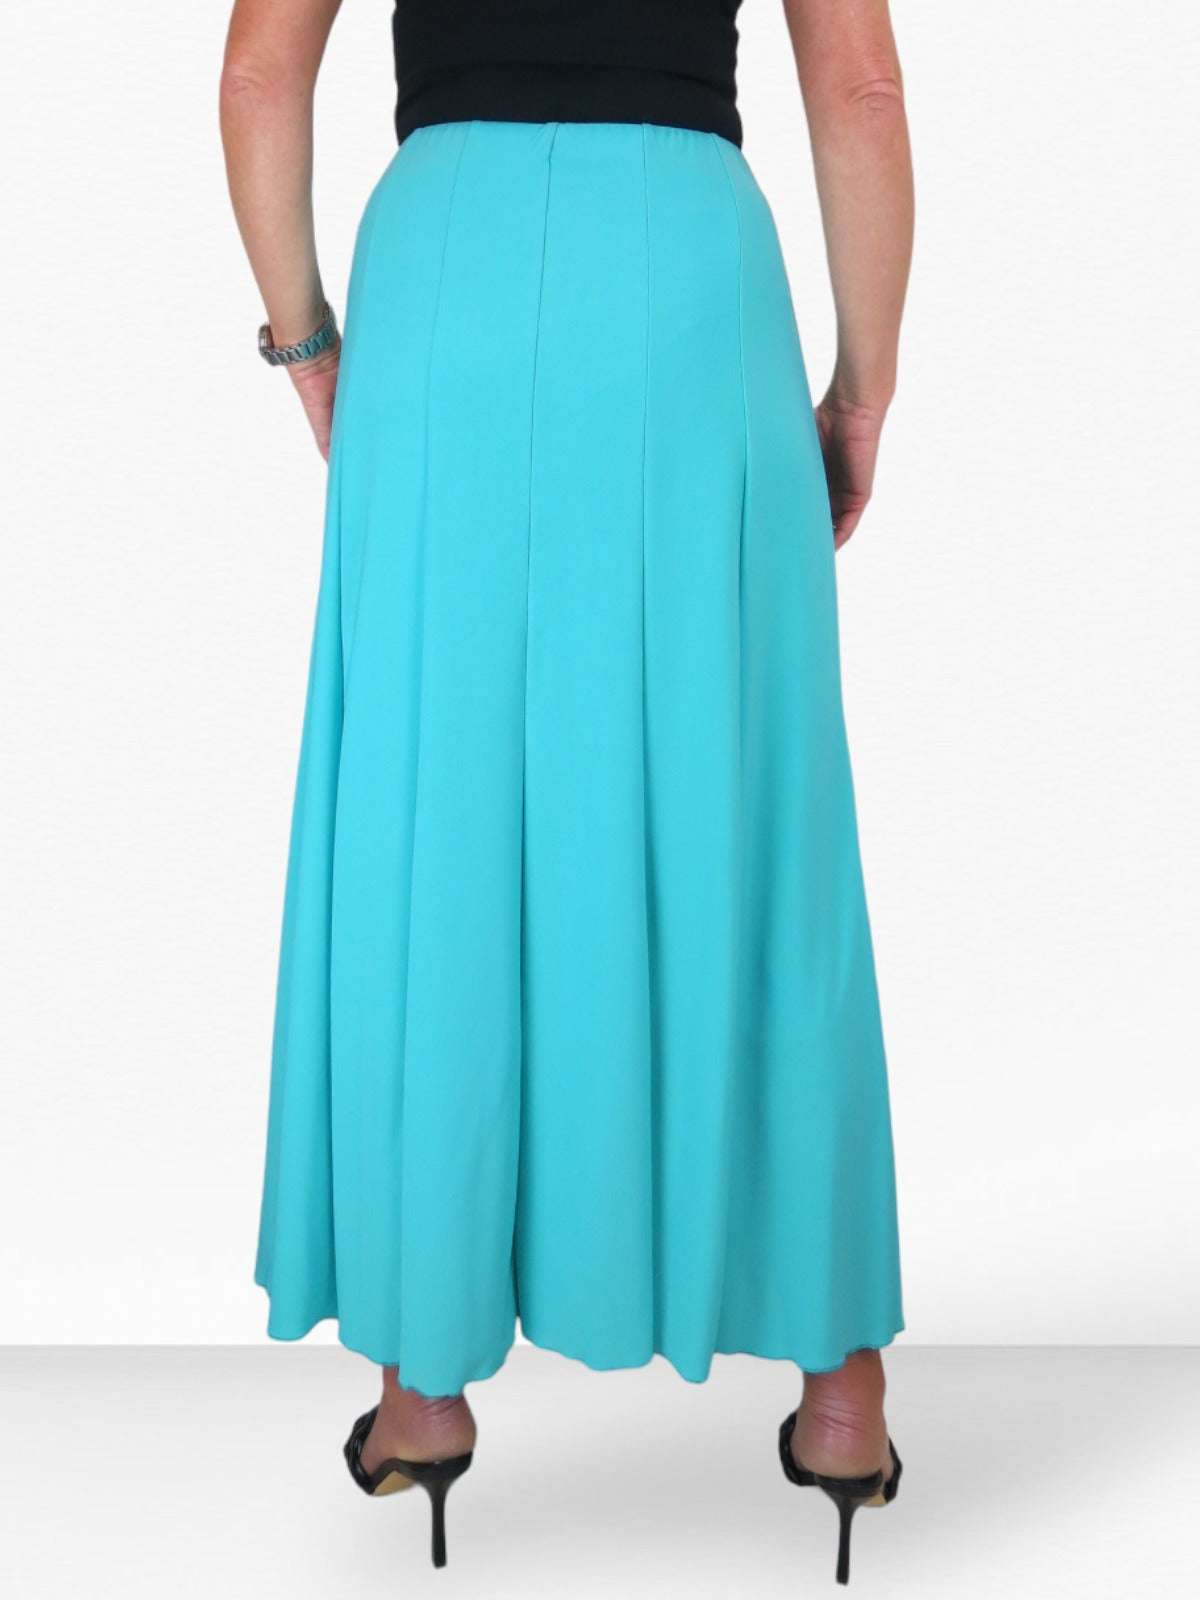 Fully Lined Stretch Long Maxi Skirt Turquoise